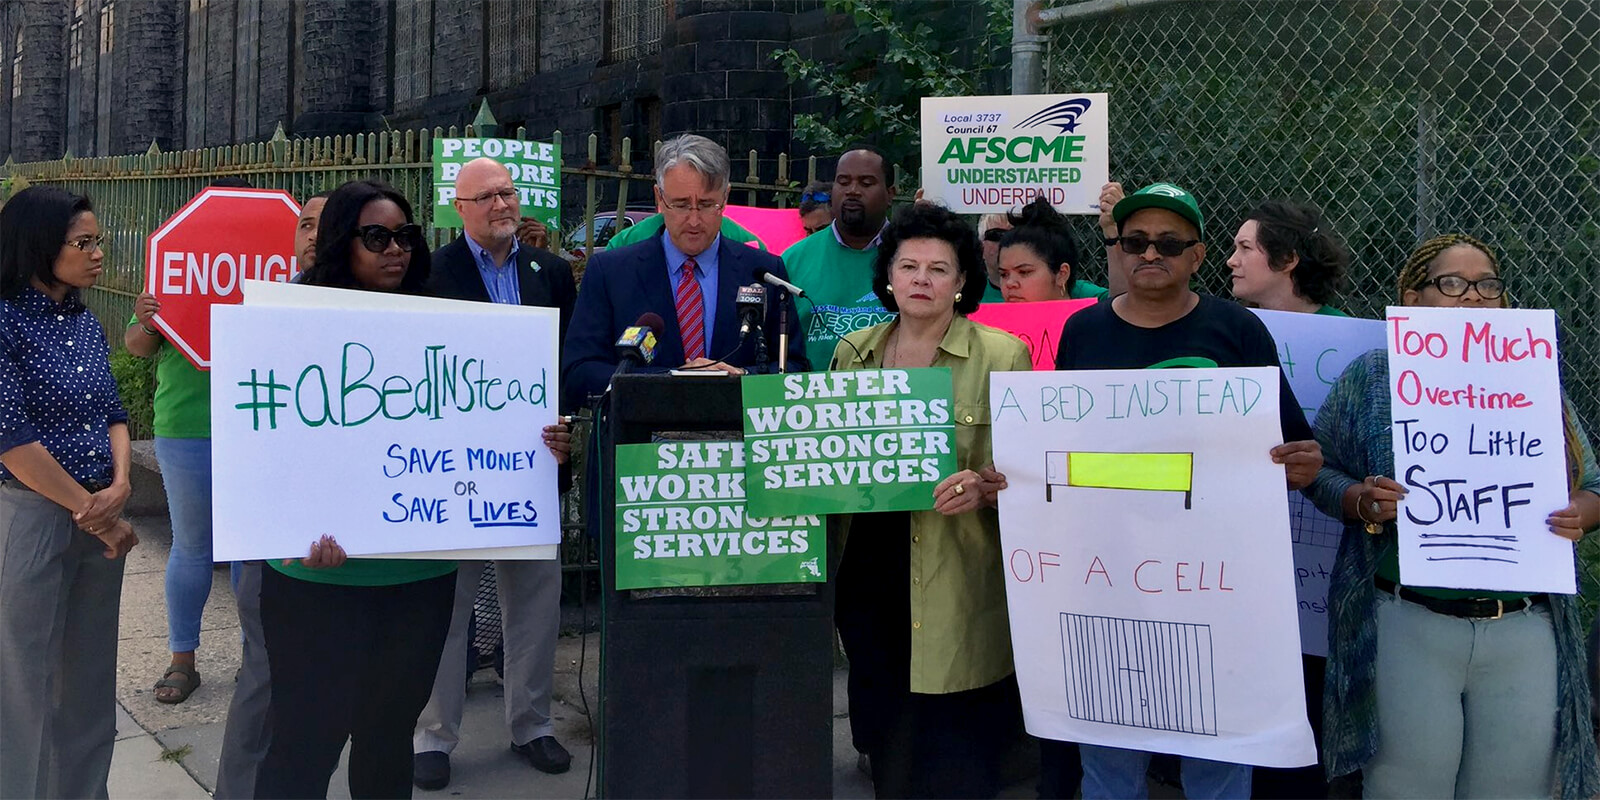 AFSCME Maryland Leads Fight Against ‘Public Health Crisis’